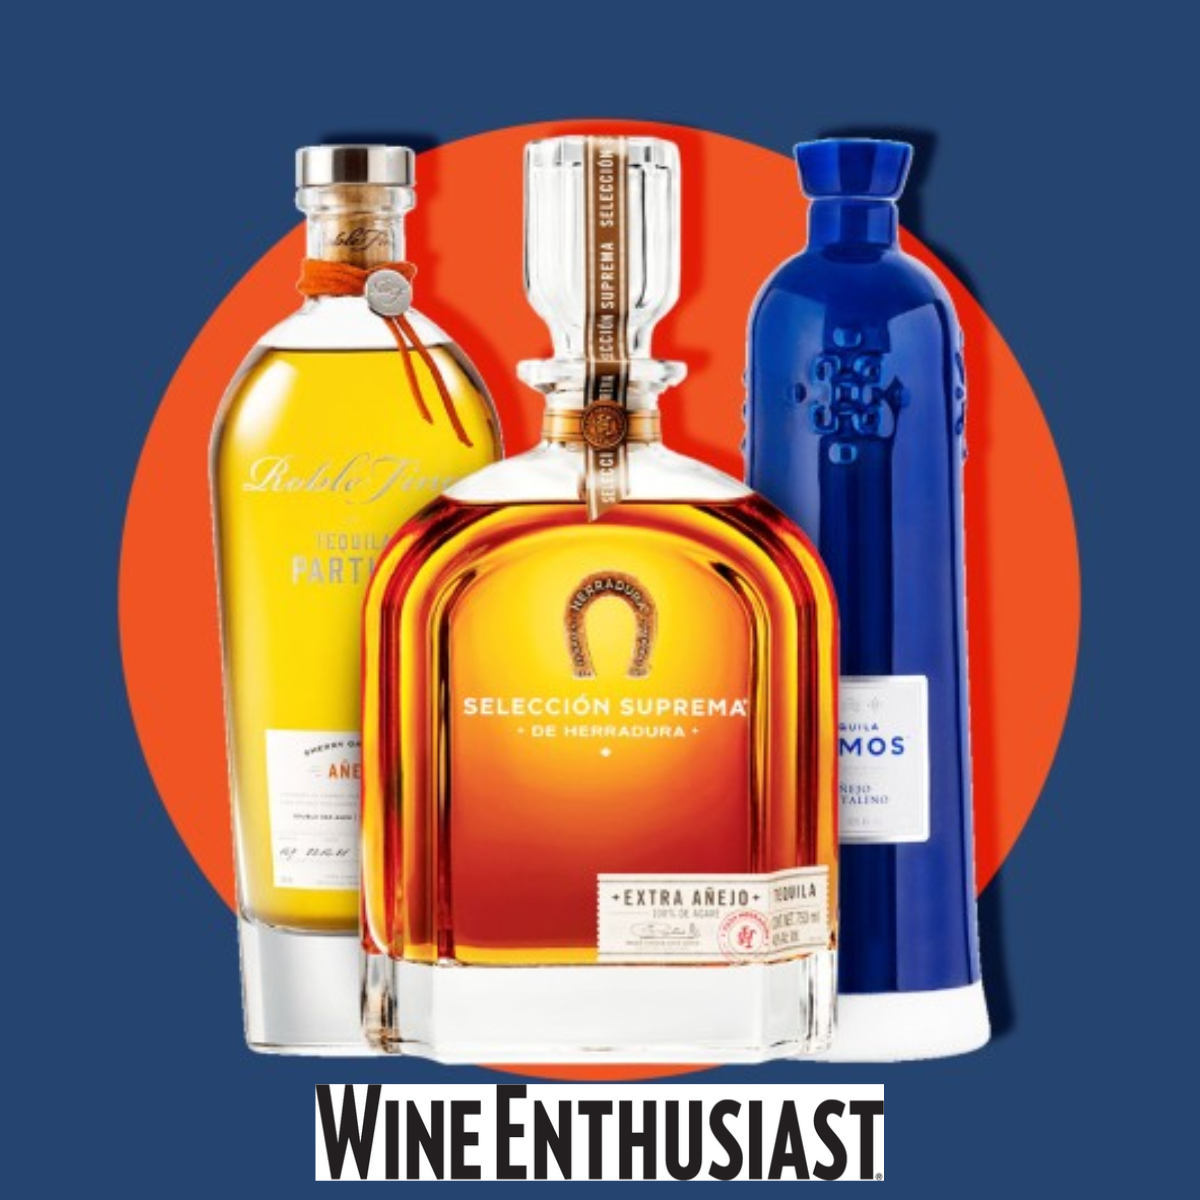 WINE ENTHUSIAST - 10 Best Sipping Tequilas to Enjoy Right Now